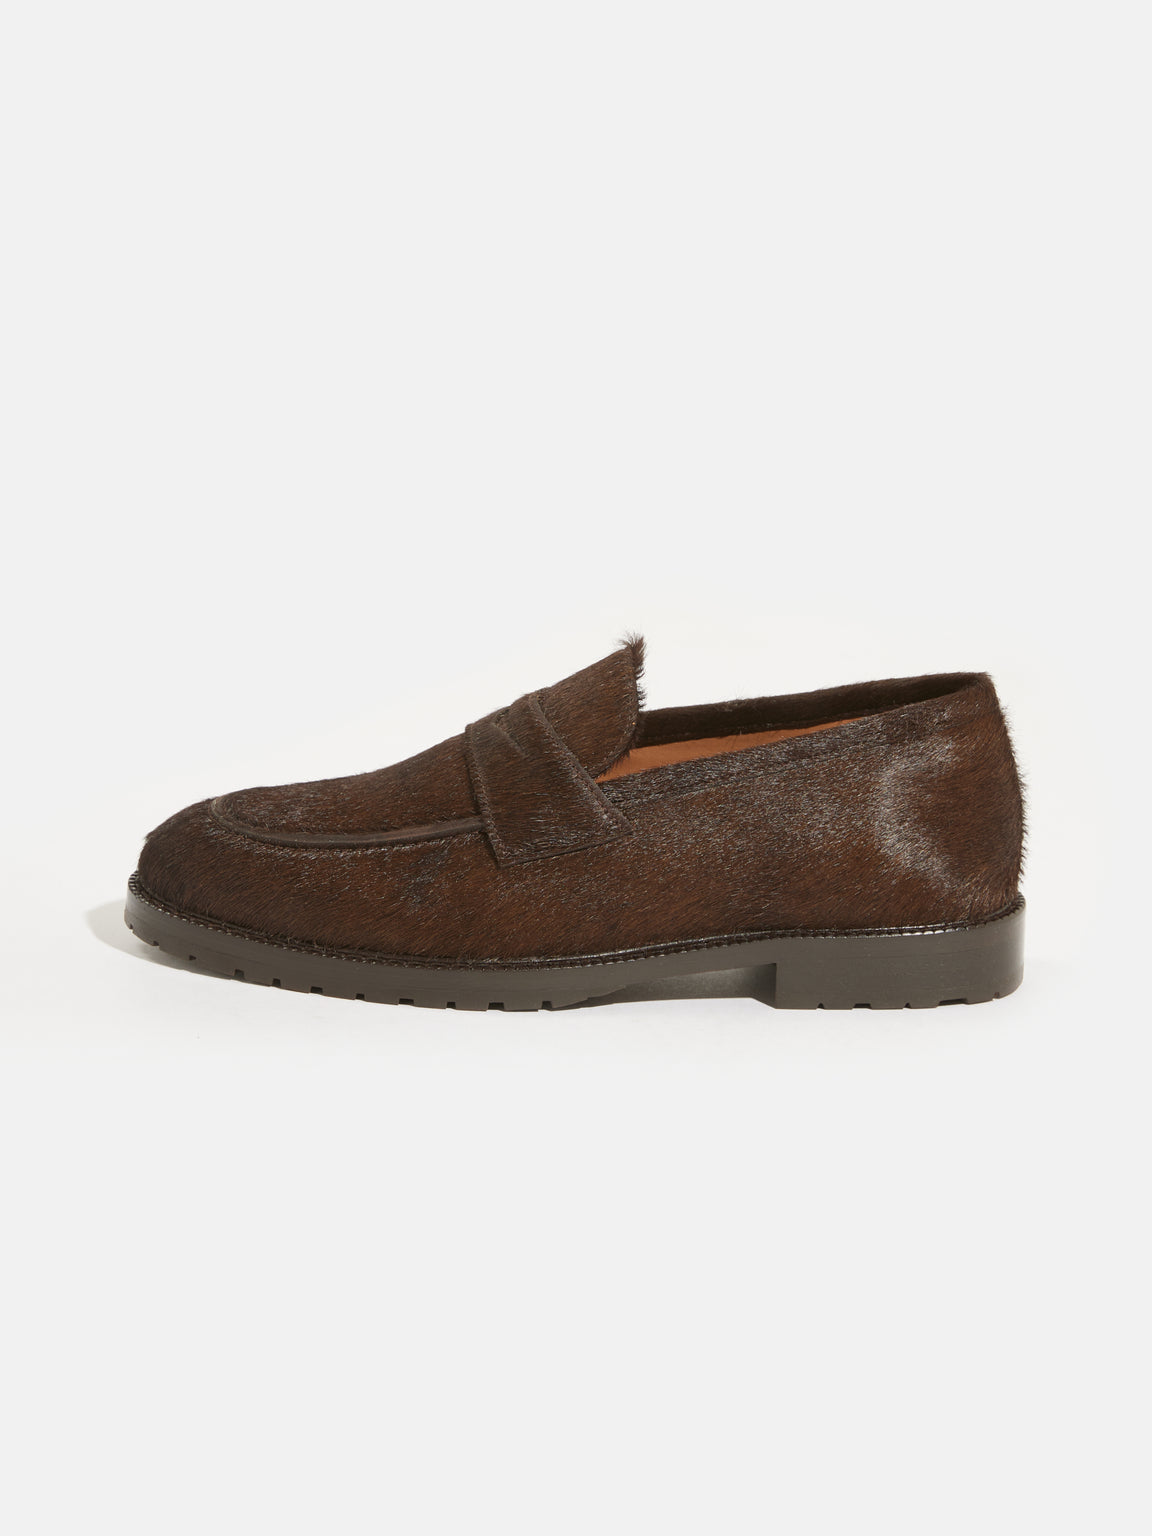 ANTHOLOGY x BELLEROSE | HAIR-ON LEATHER LOAFER FOR WOMEN BROWN